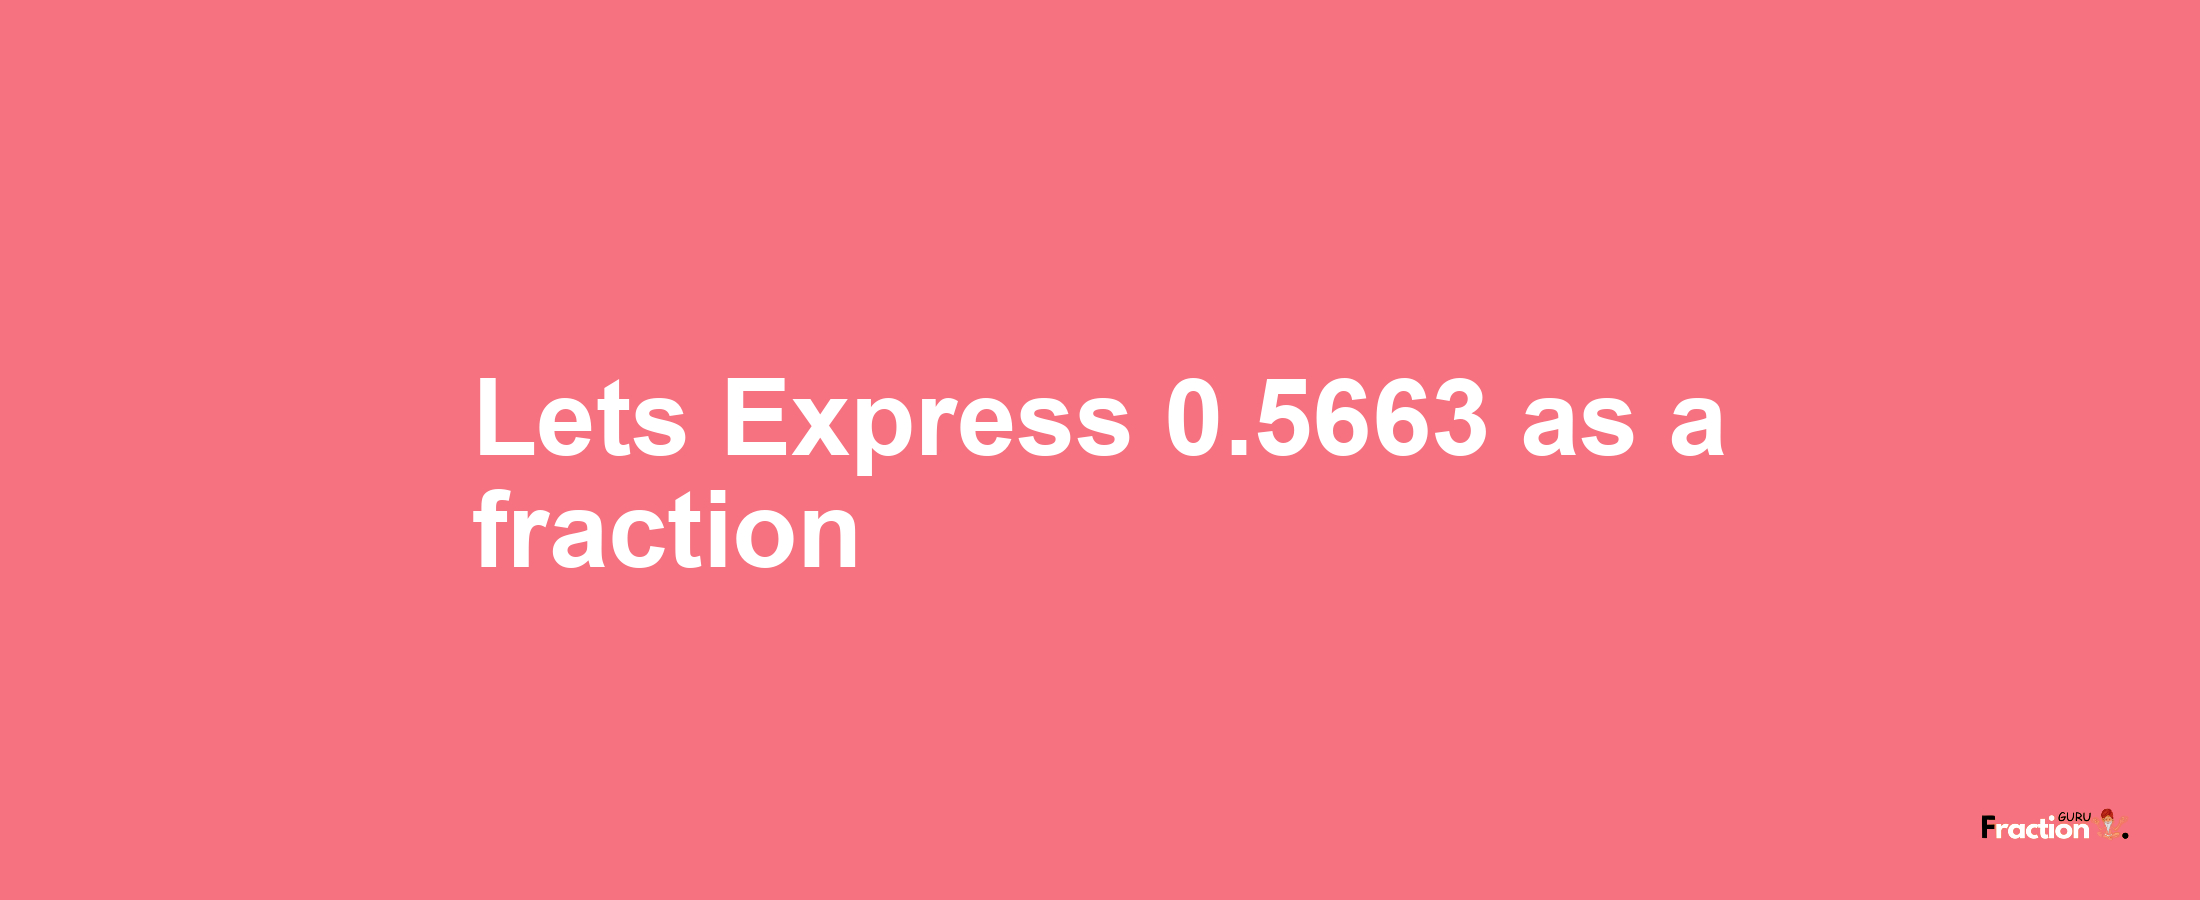 Lets Express 0.5663 as afraction